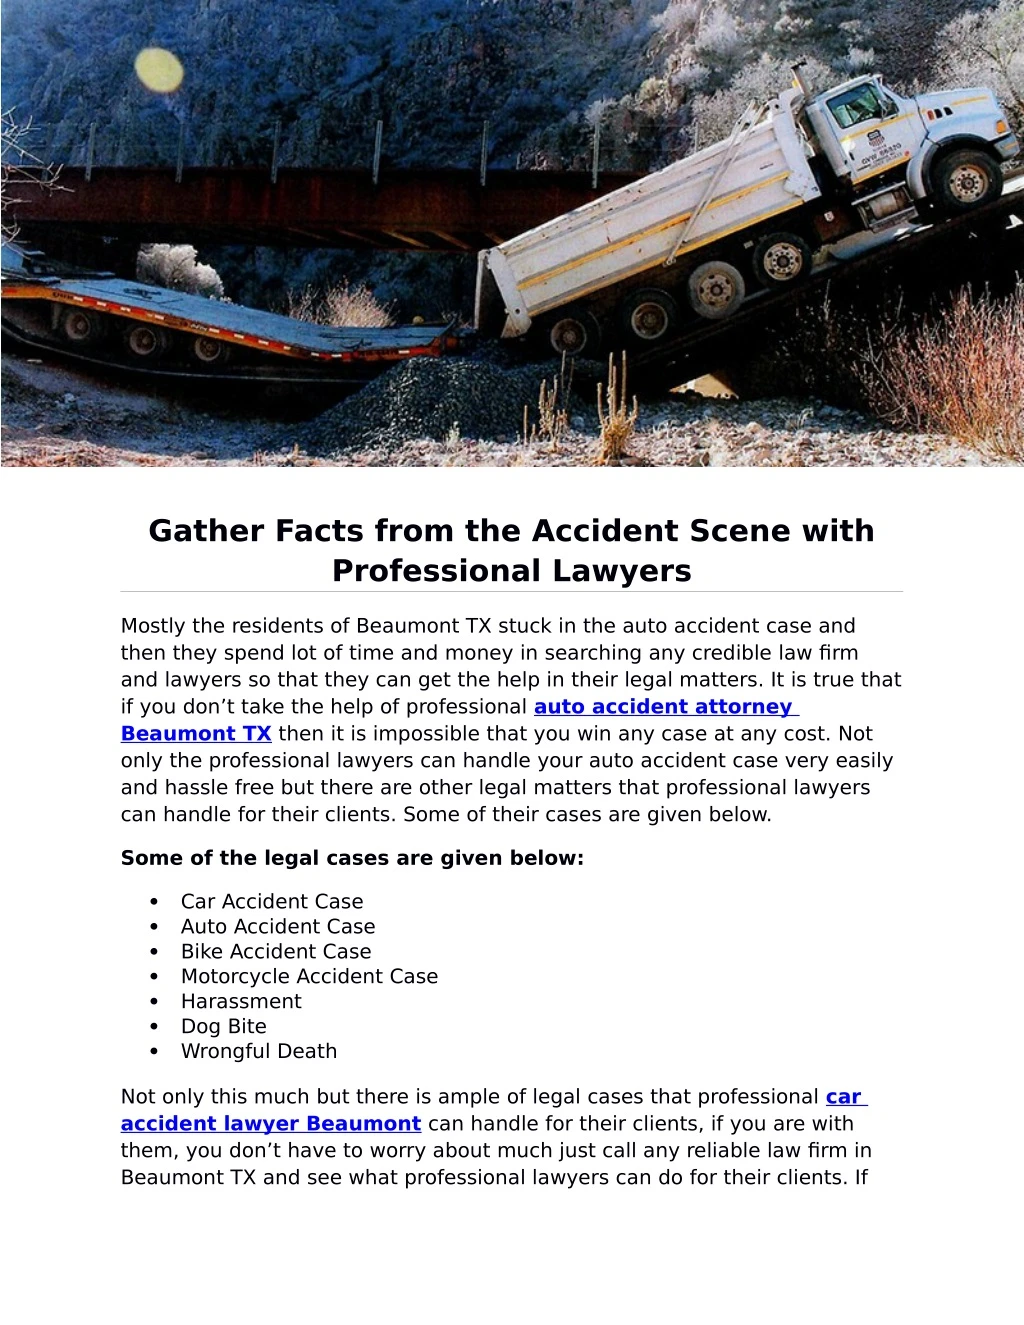 gather facts from the accident scene with